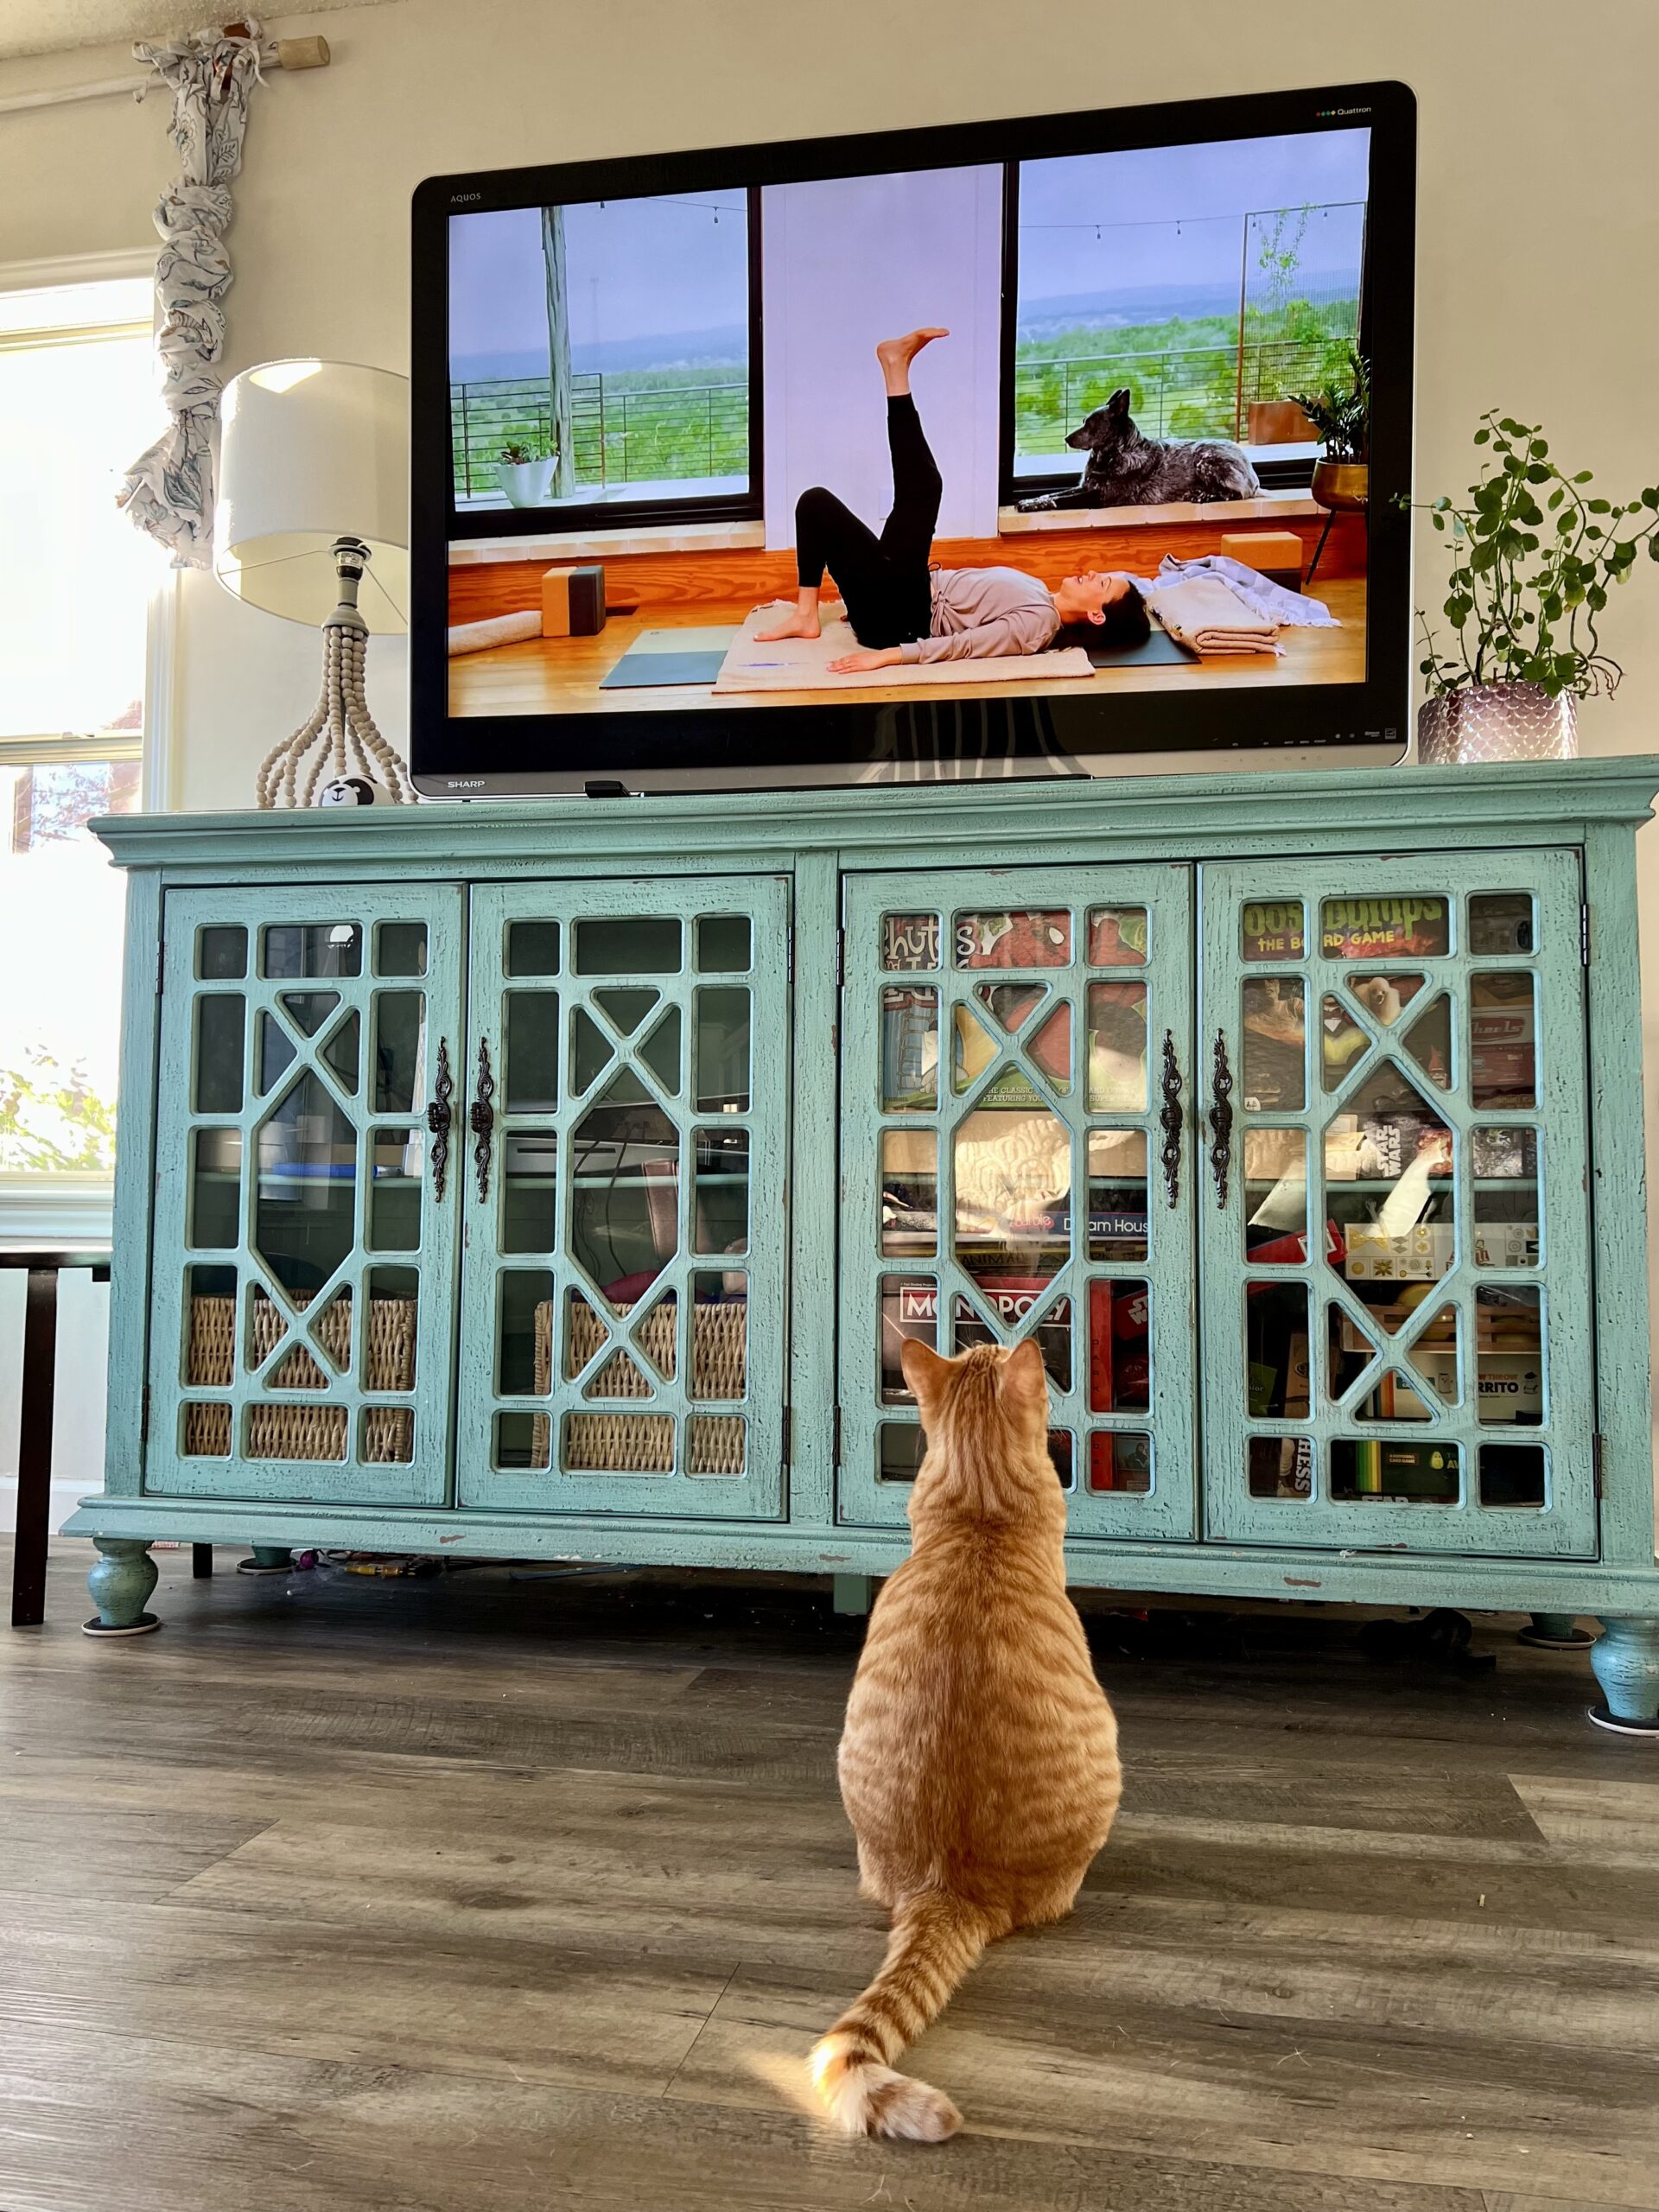 Orange tabby cat watching TV while someone is doing yoga.